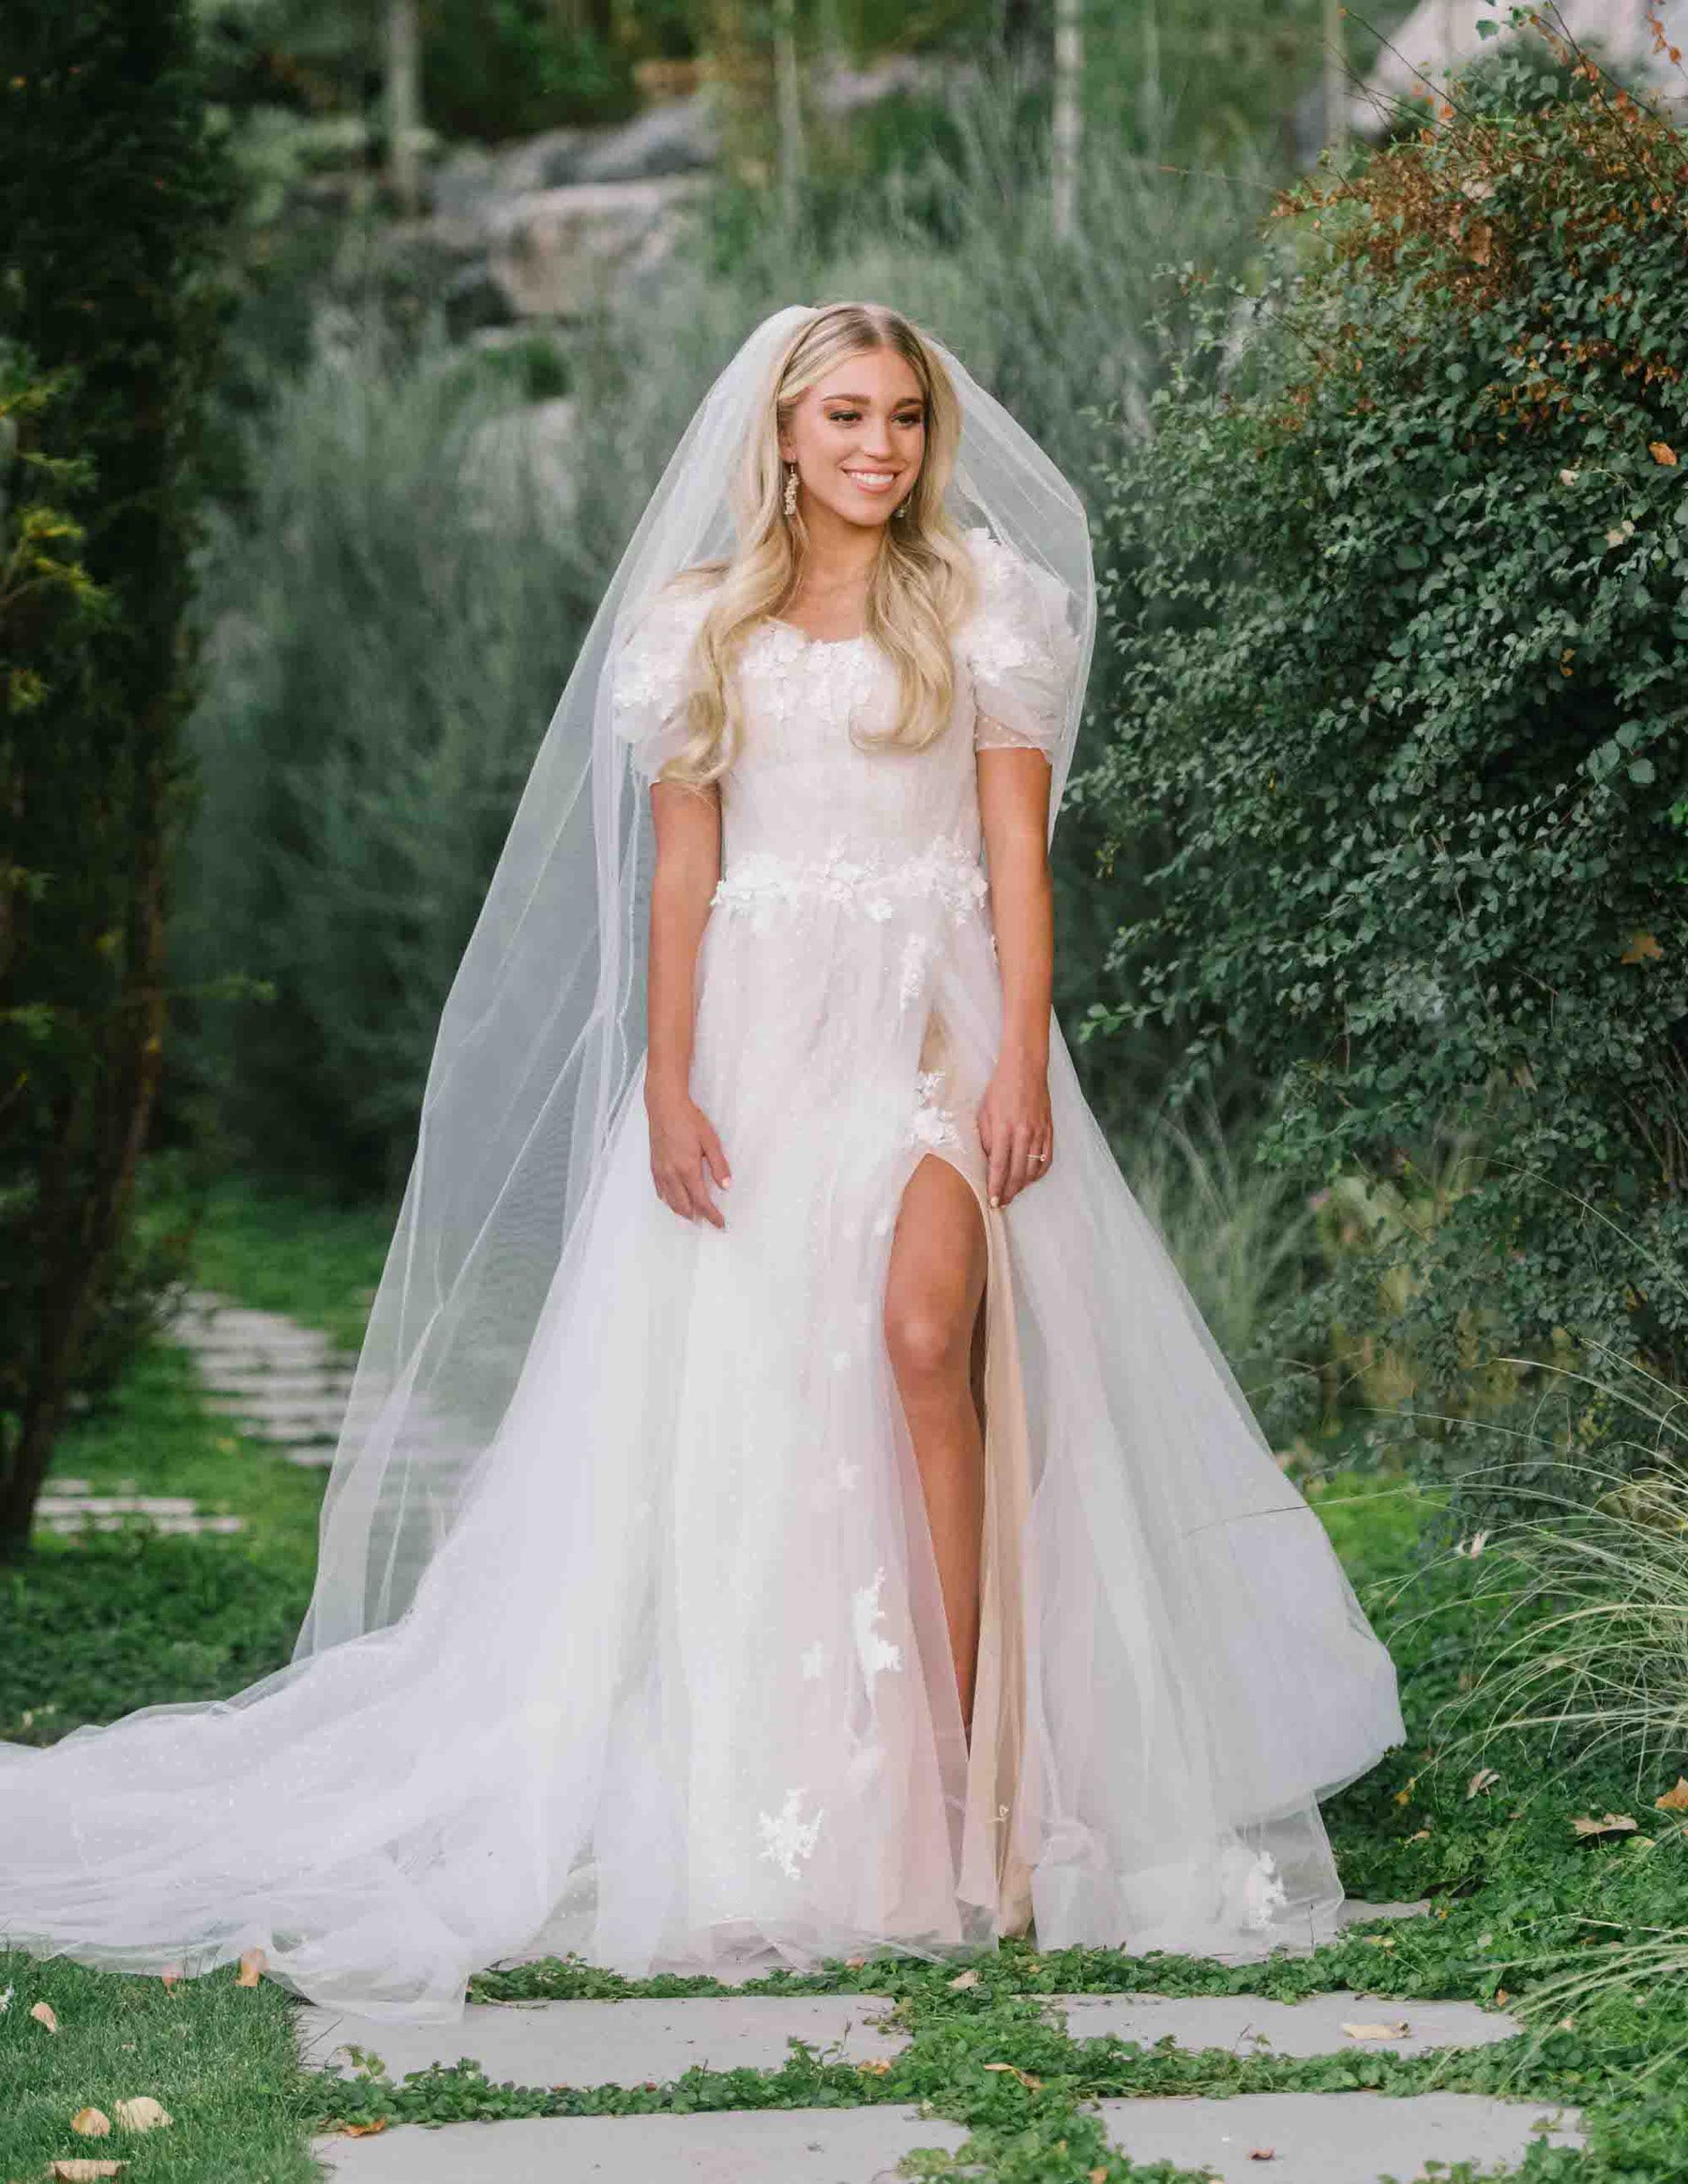 Bride standing along a stone pathway wearing a modest wedding dress with a slit above the know. This dress has a ballgown Silhouette with floral appliques and 